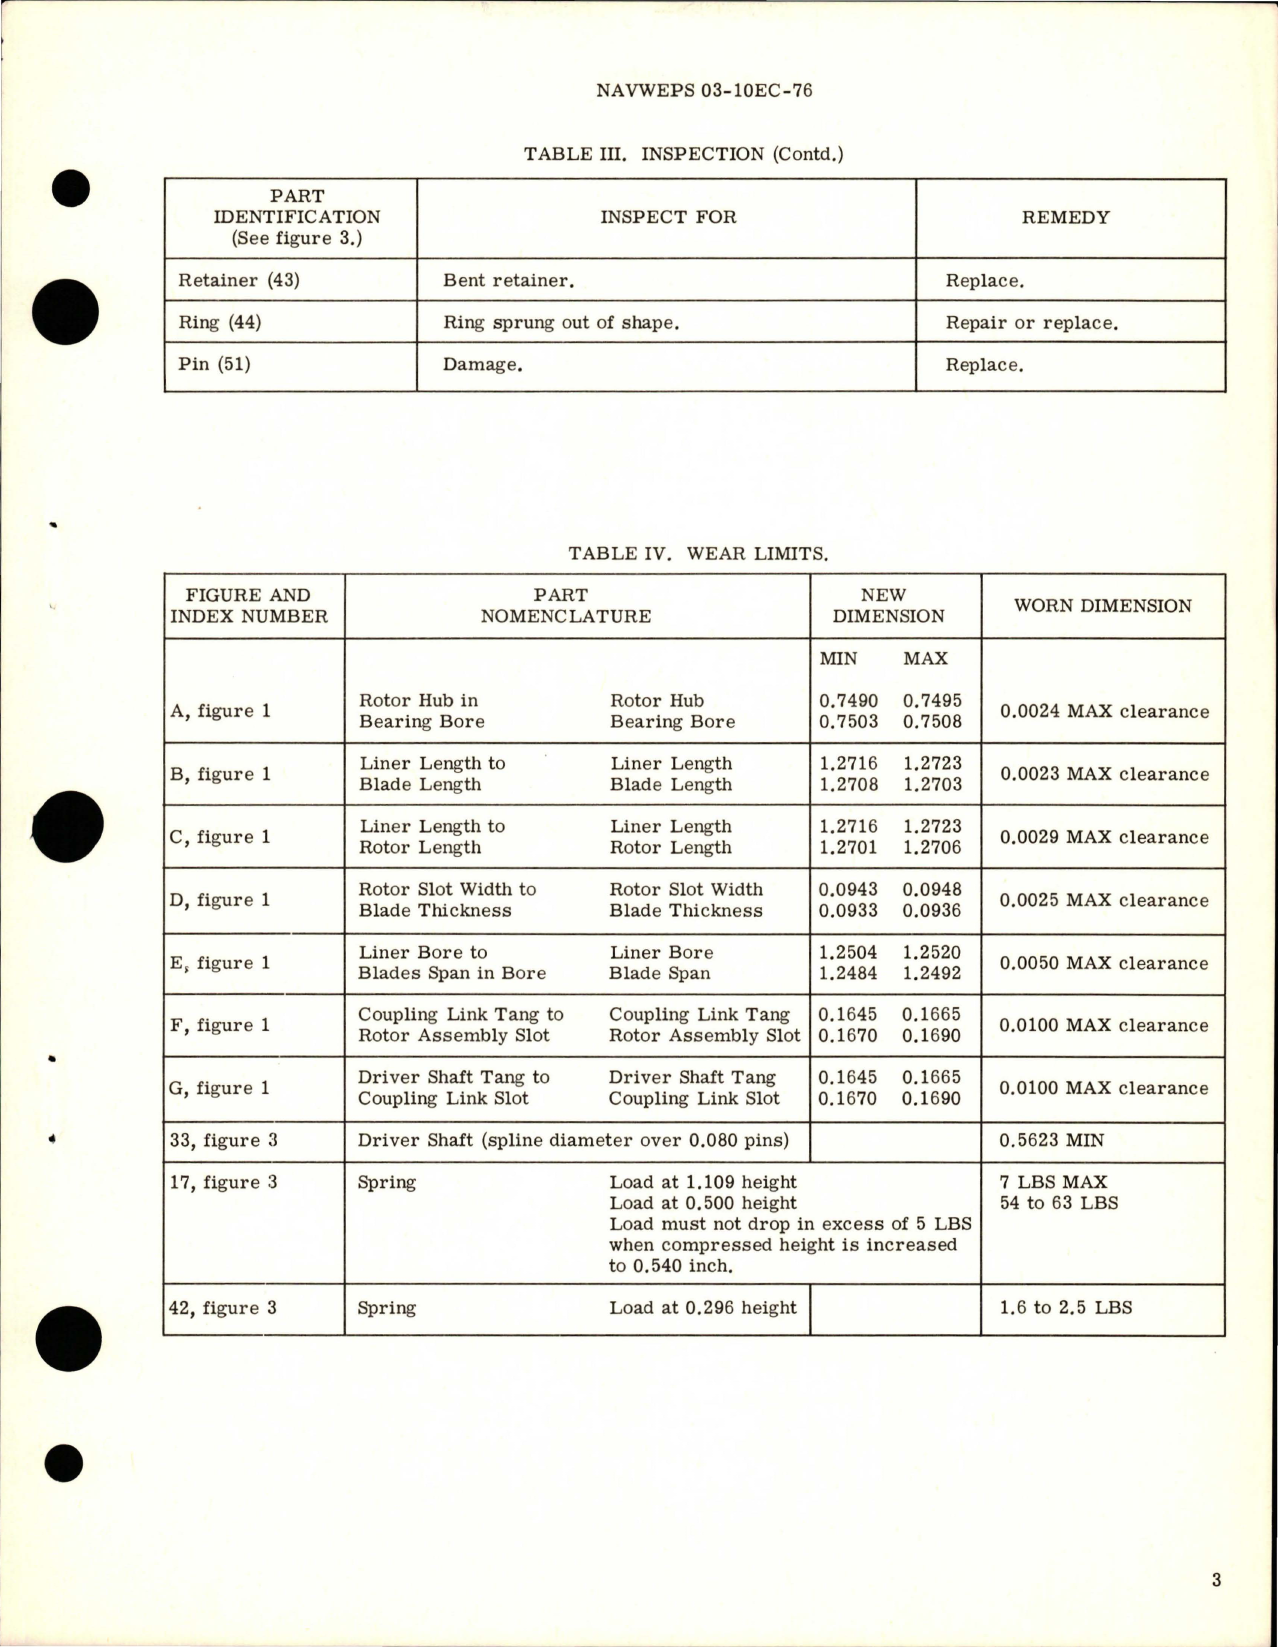 Sample page 5 from AirCorps Library document: Overhaul Instructions with Parts for Engine Driven Fuel Pump - Model TF3500-5 